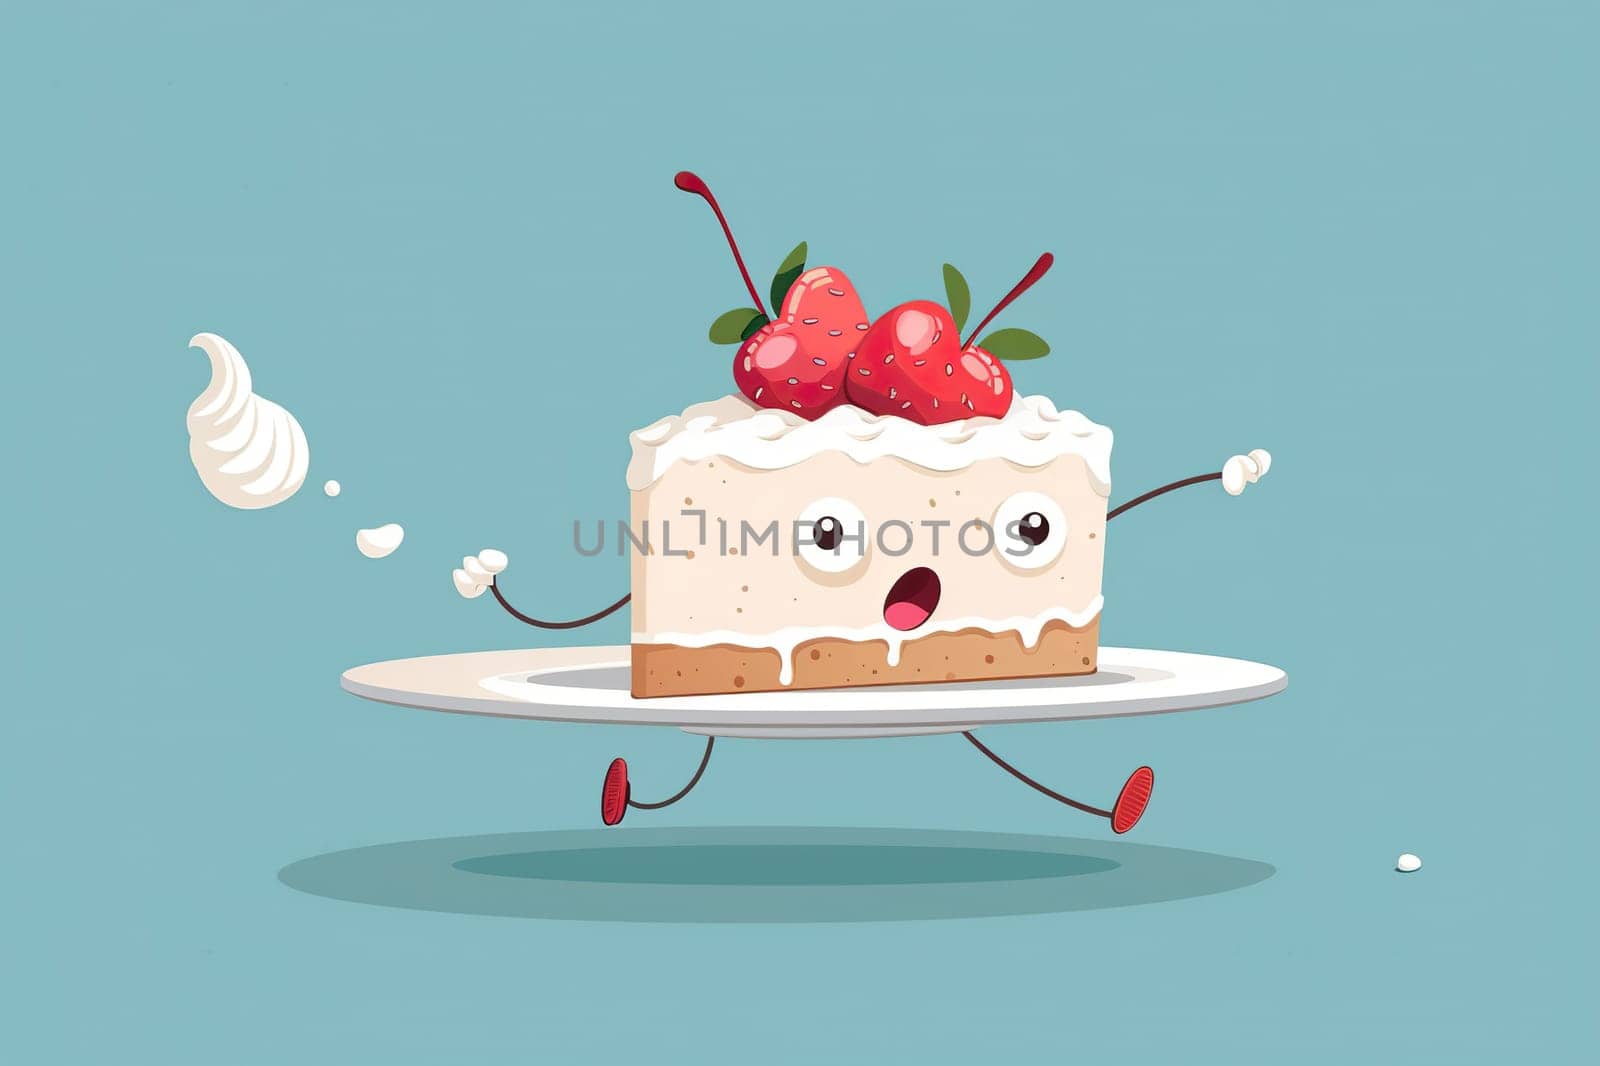 A frightened piece of cake with white cream and chocolate sponge cake and a cherry on top runs off the table. The concept of holiday, fun, sweets. Cartoon style. Generated by artificial intelligence by Vovmar